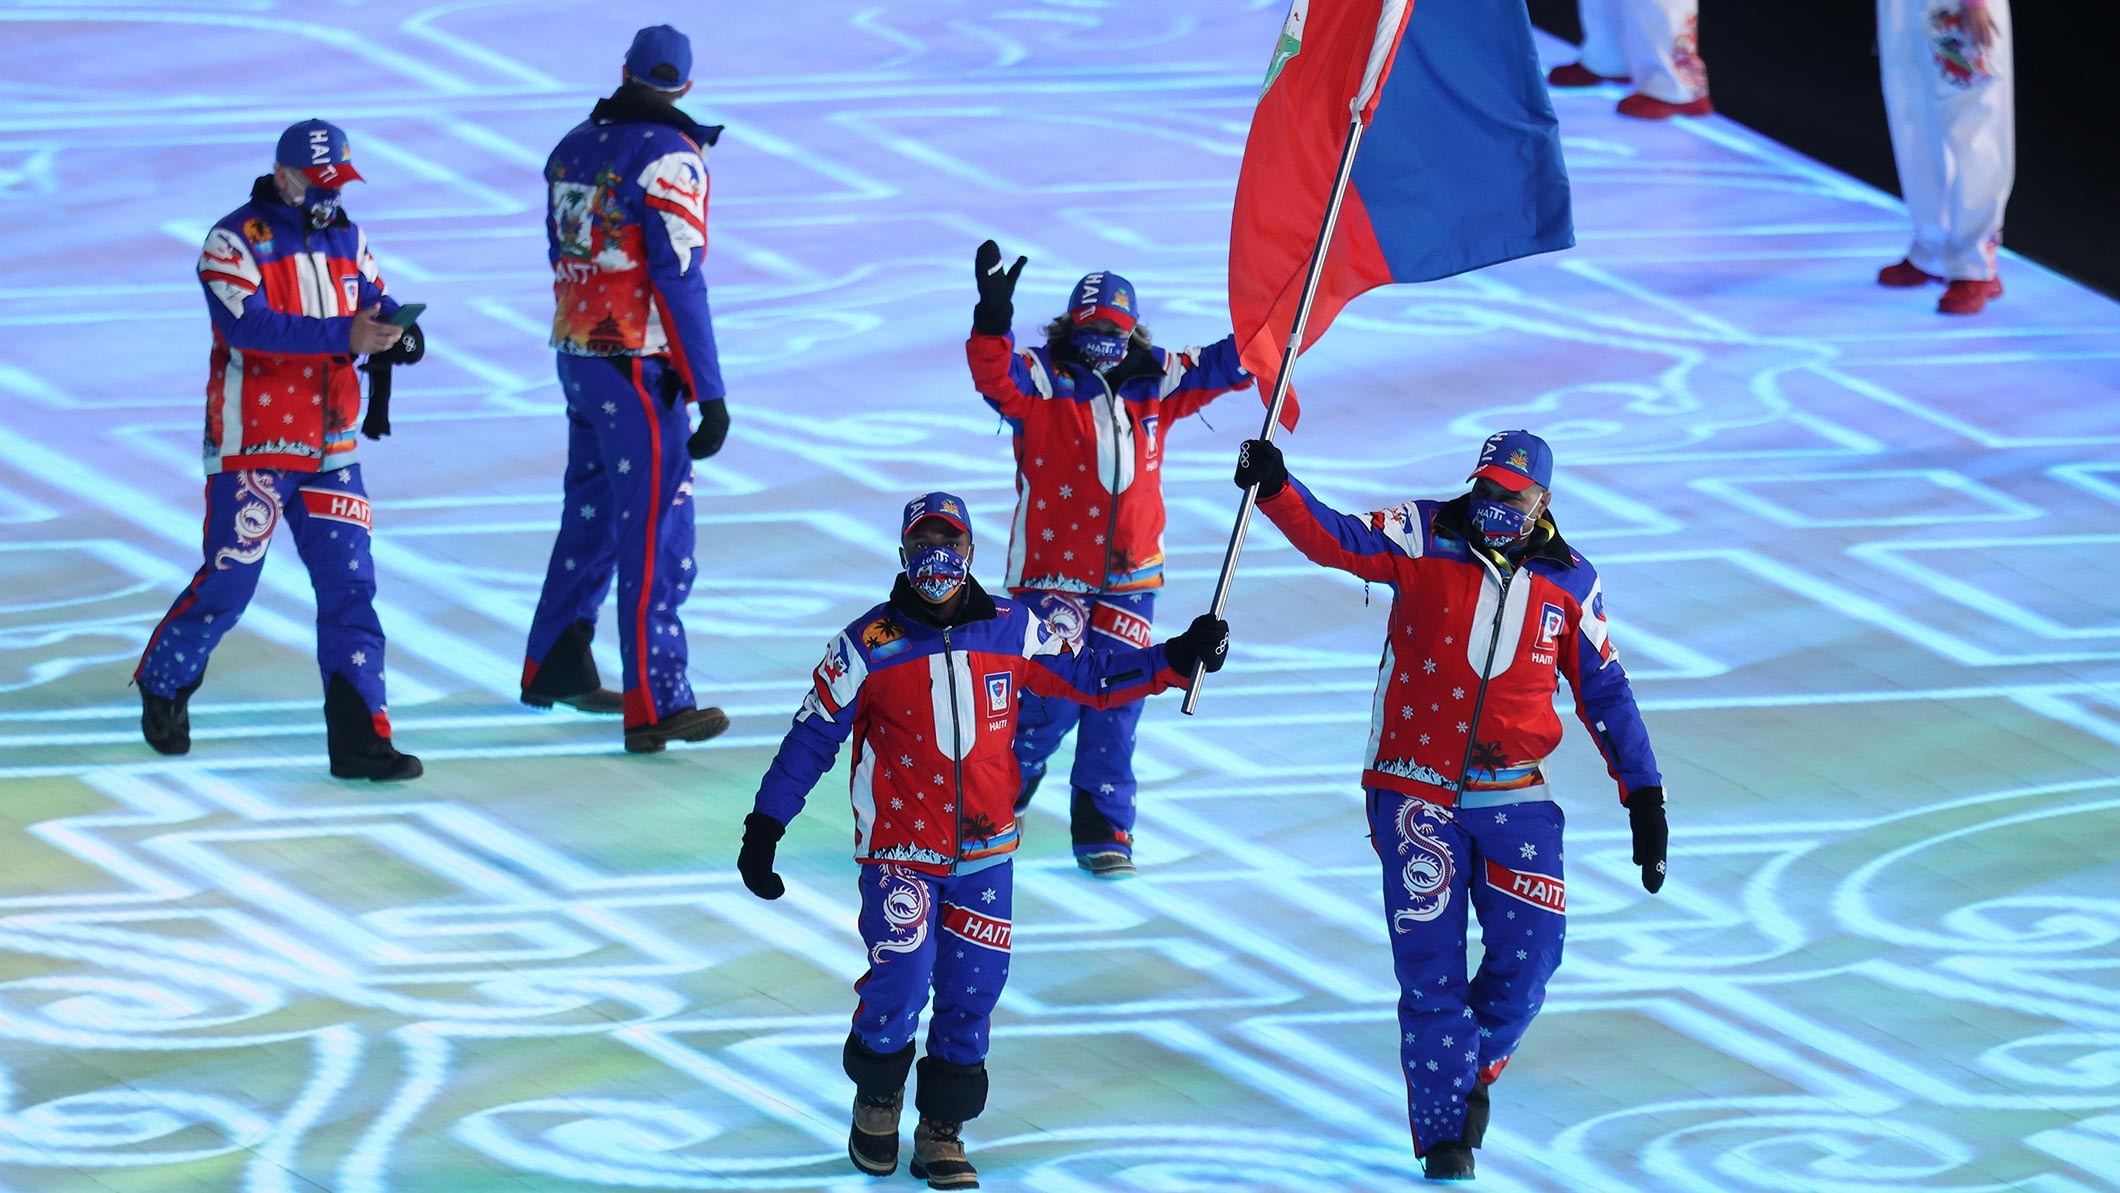 Flag bearer Richardson Viano of Team Haiti carries their flag during the Opening Ceremony of the Beijing 2022 Winter Olympics at the Beijing National Stadium on February 04, 2022 in Beijing, China. 